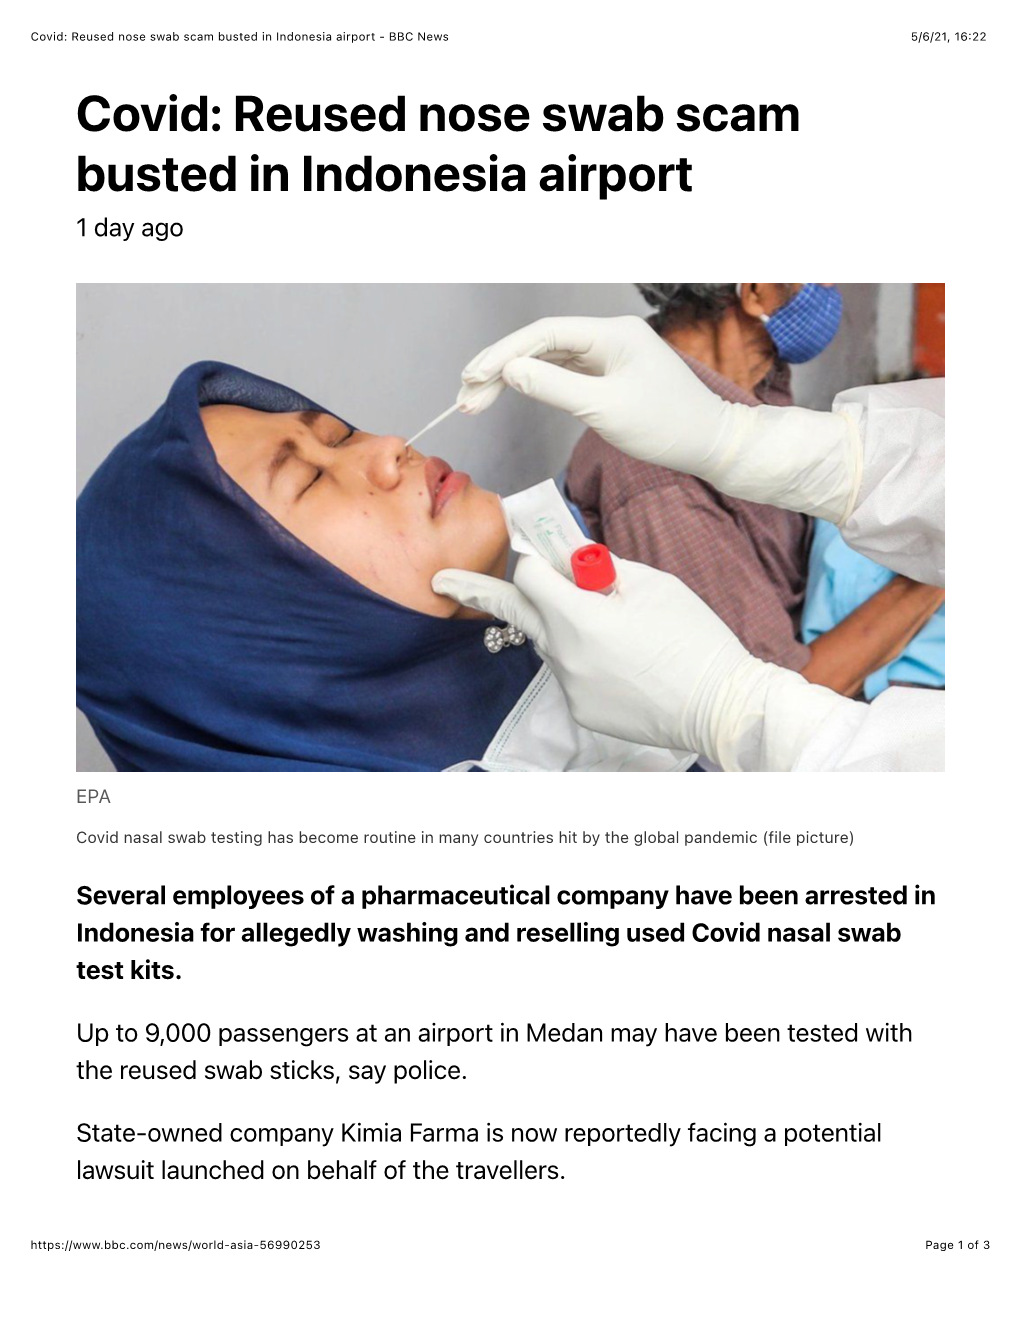 Covid: Reused Nose Swab Scam Busted in Indonesia Airport - BBC News 5/6/21, 16:22 Covid: Reused Nose Swab Scam Busted in Indonesia Airport 1 Day Ago